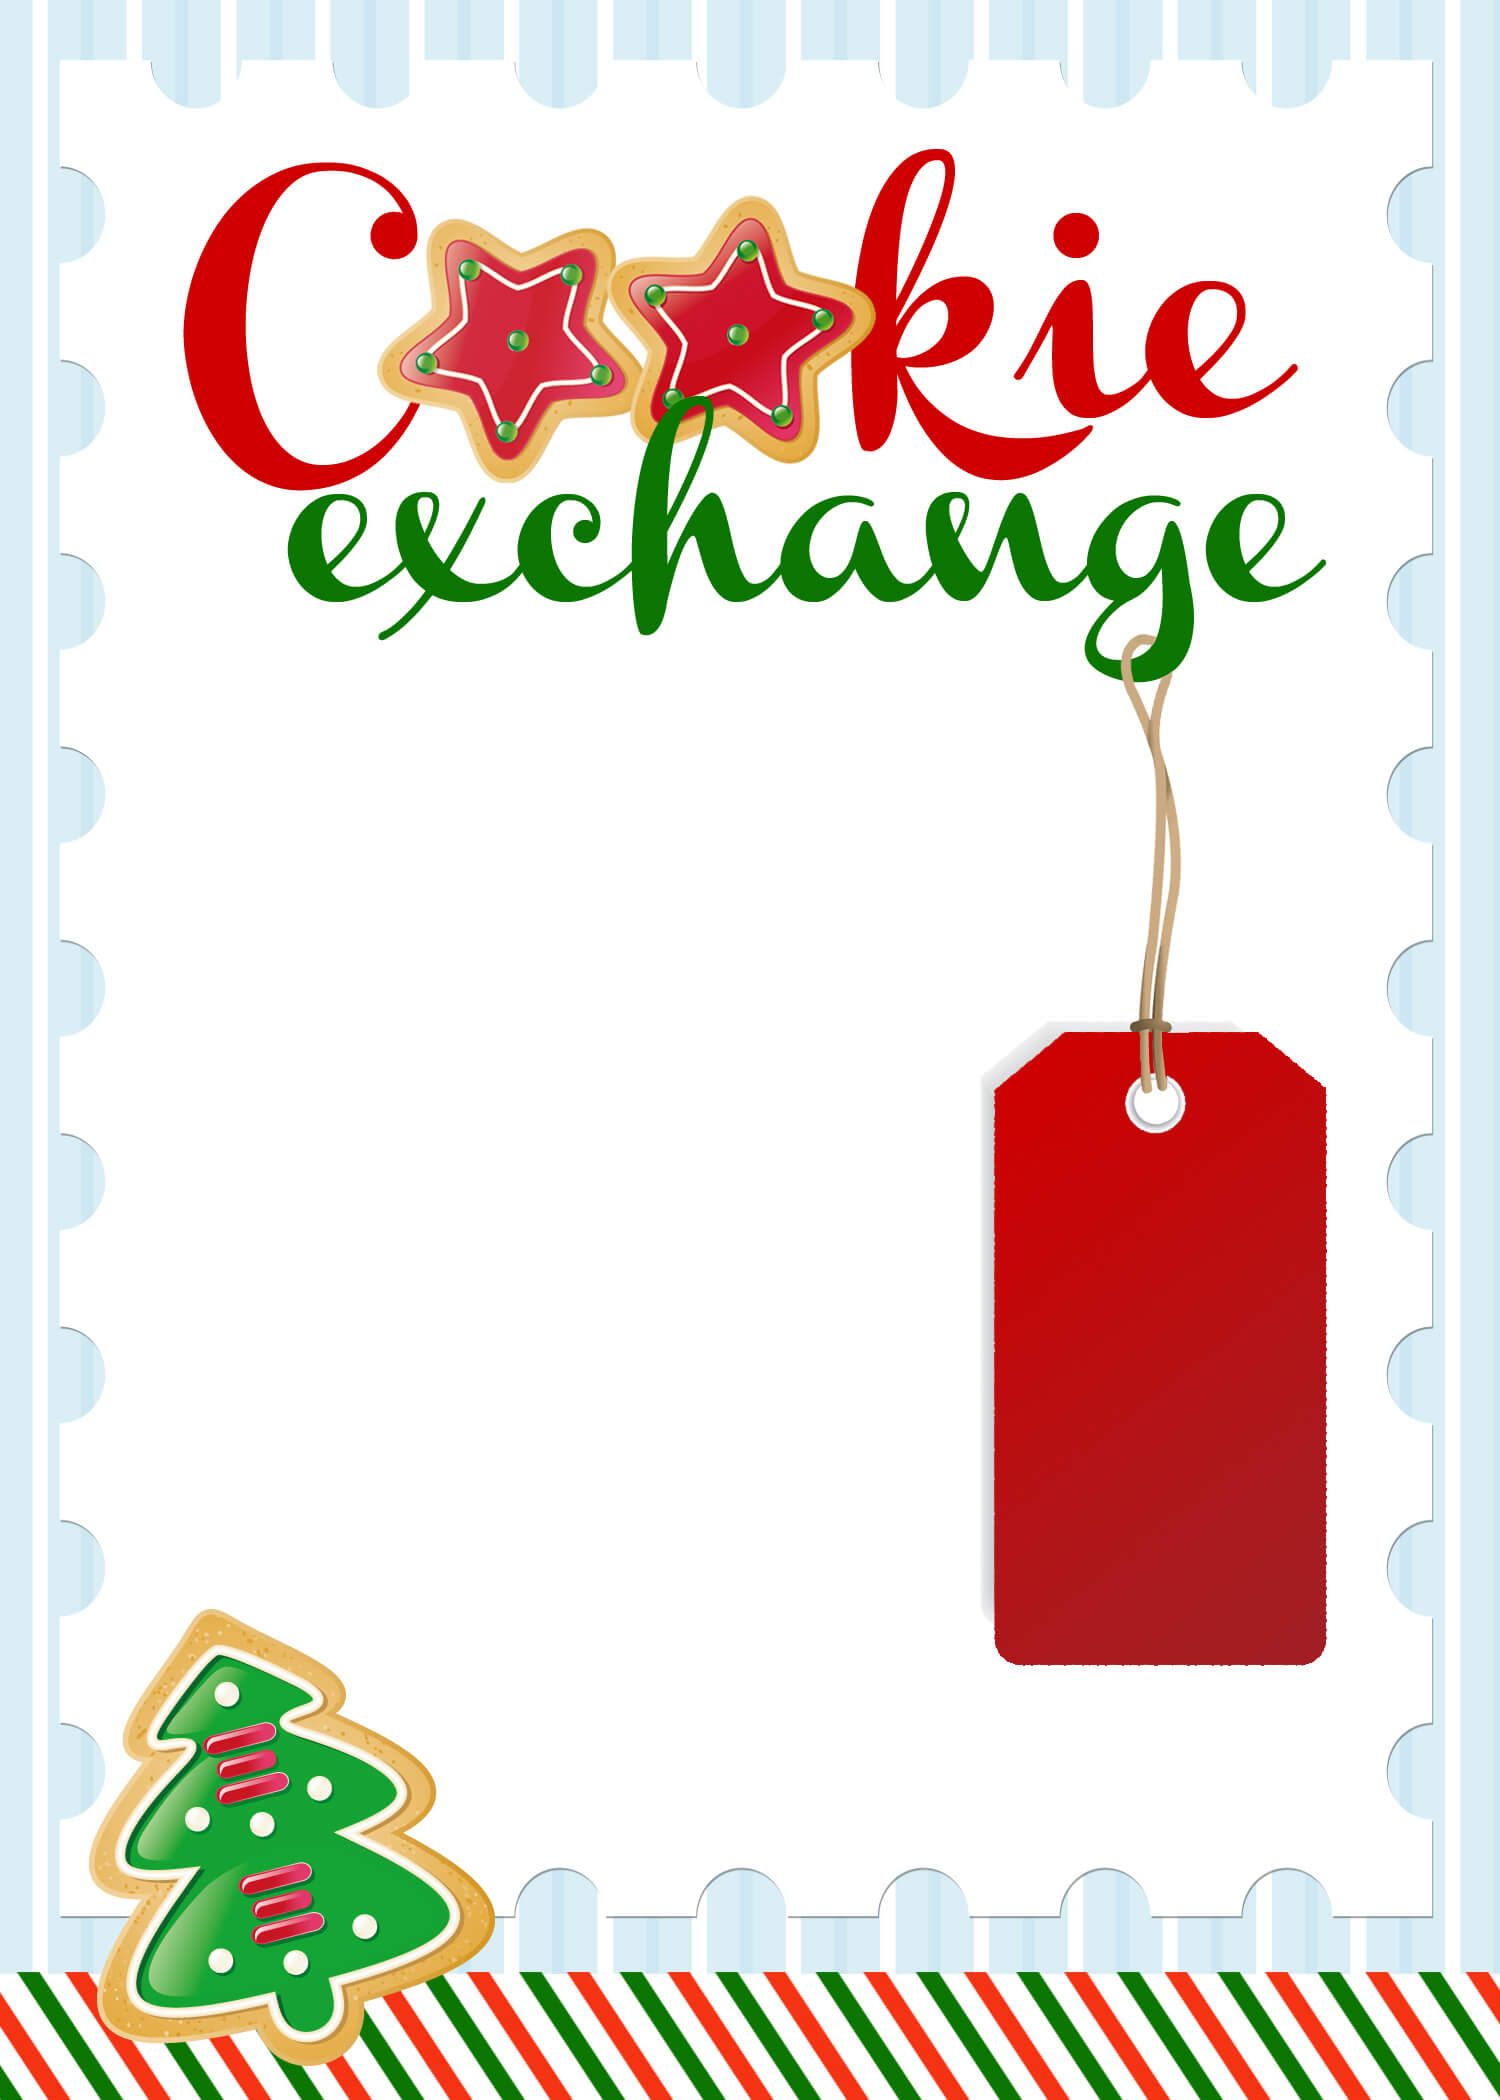 Cookie Exchange Party {Free Printables} – How To Nest For Less™ Regarding Cookie Exchange Recipe Card Template